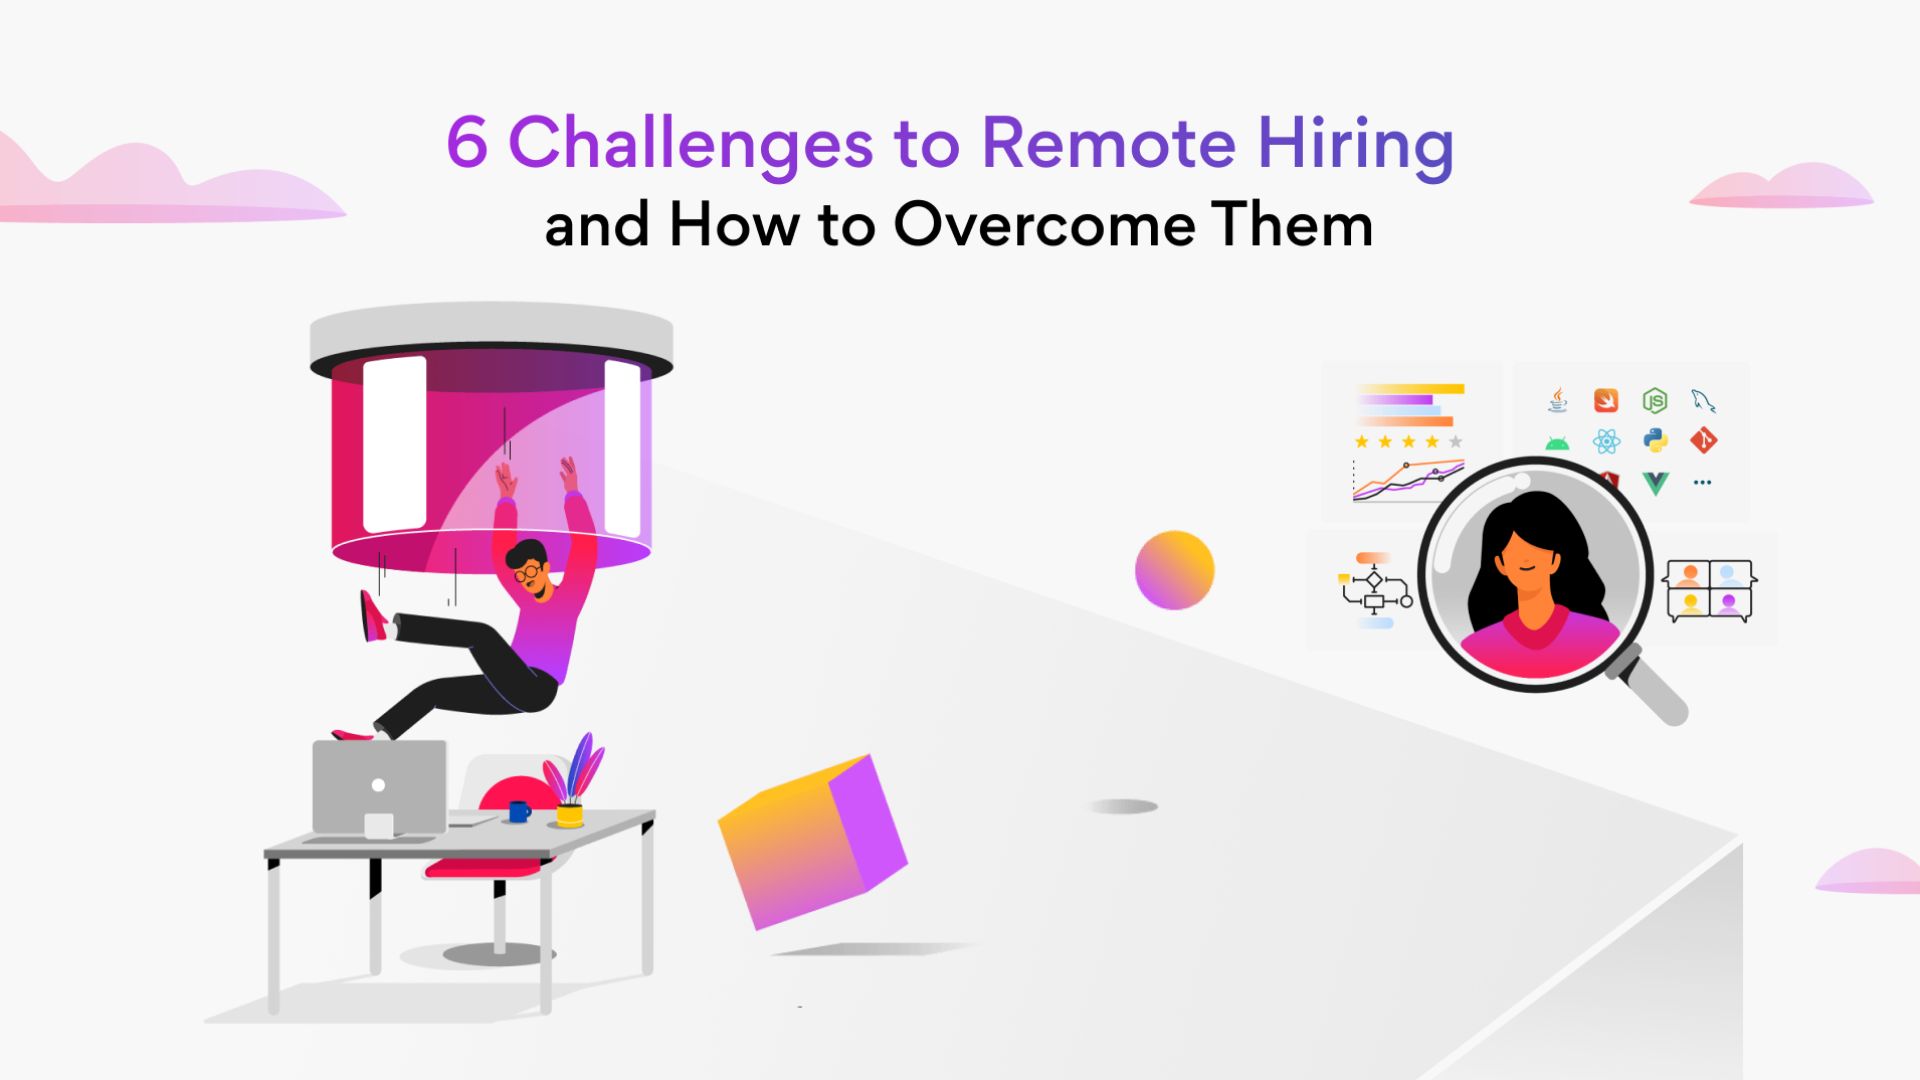 6 Challenges to Remote Hiring and How to Overcome Them